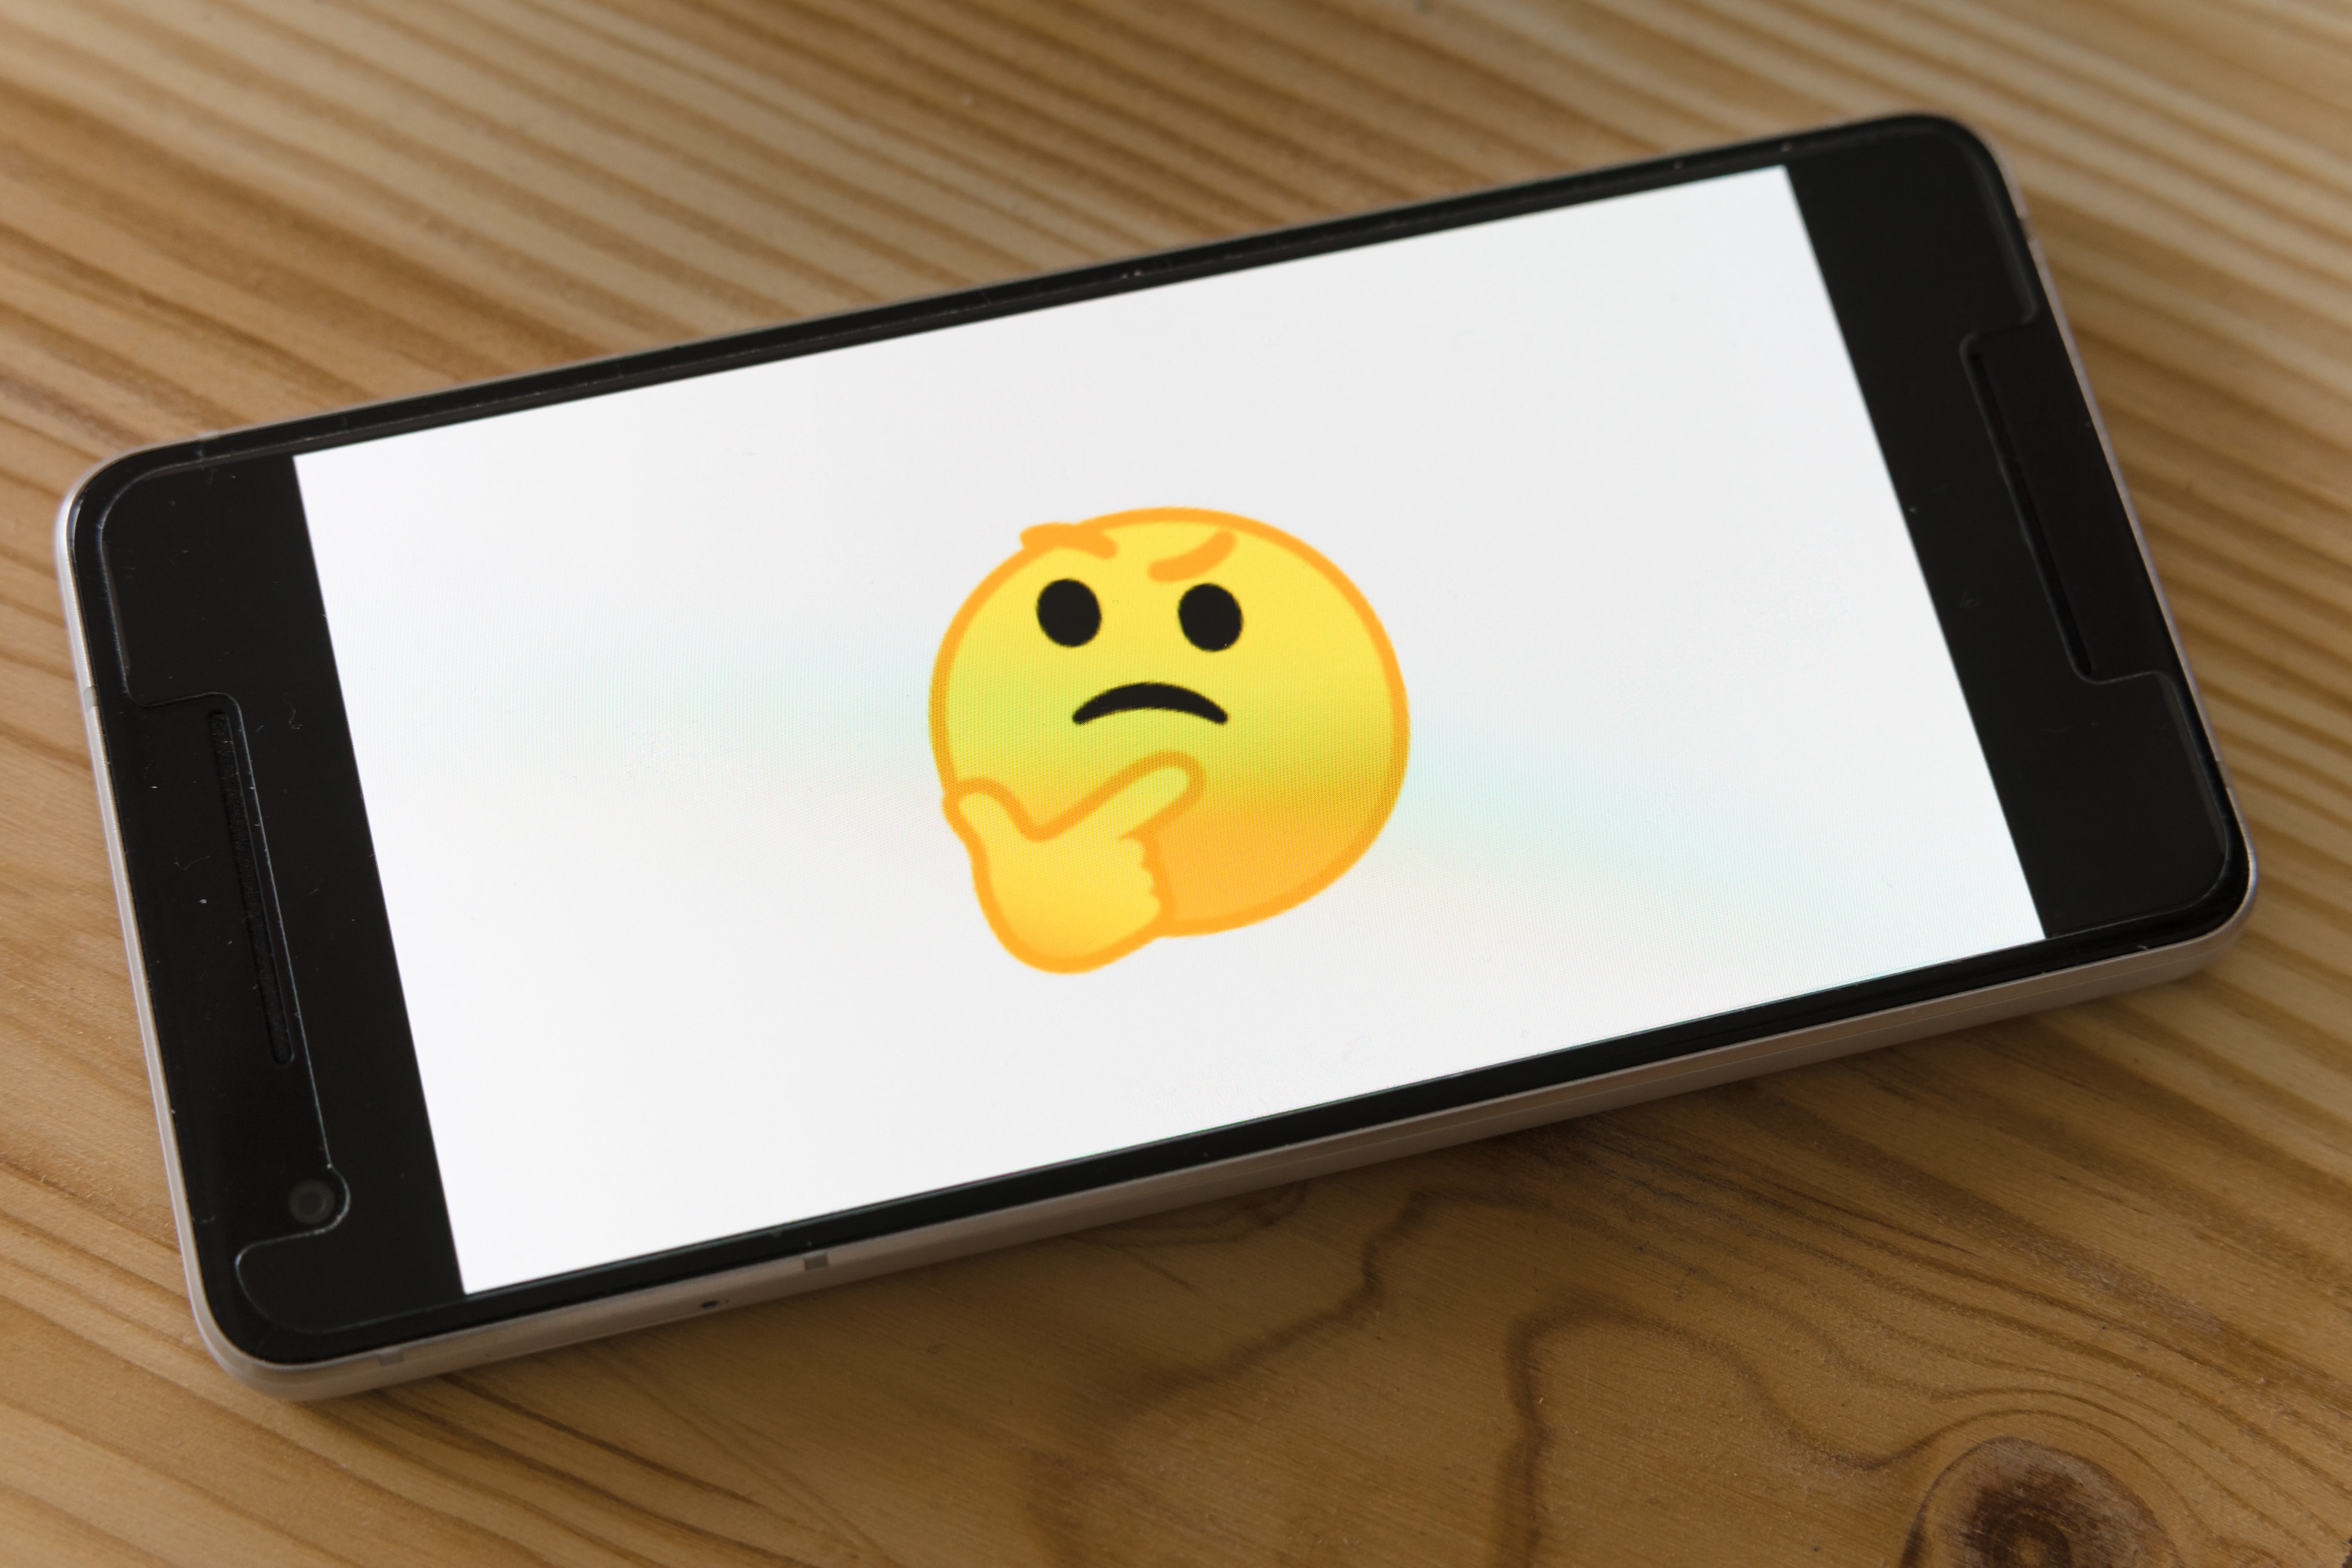 Stock image of a skeptical emoji on the screen of a smartphone